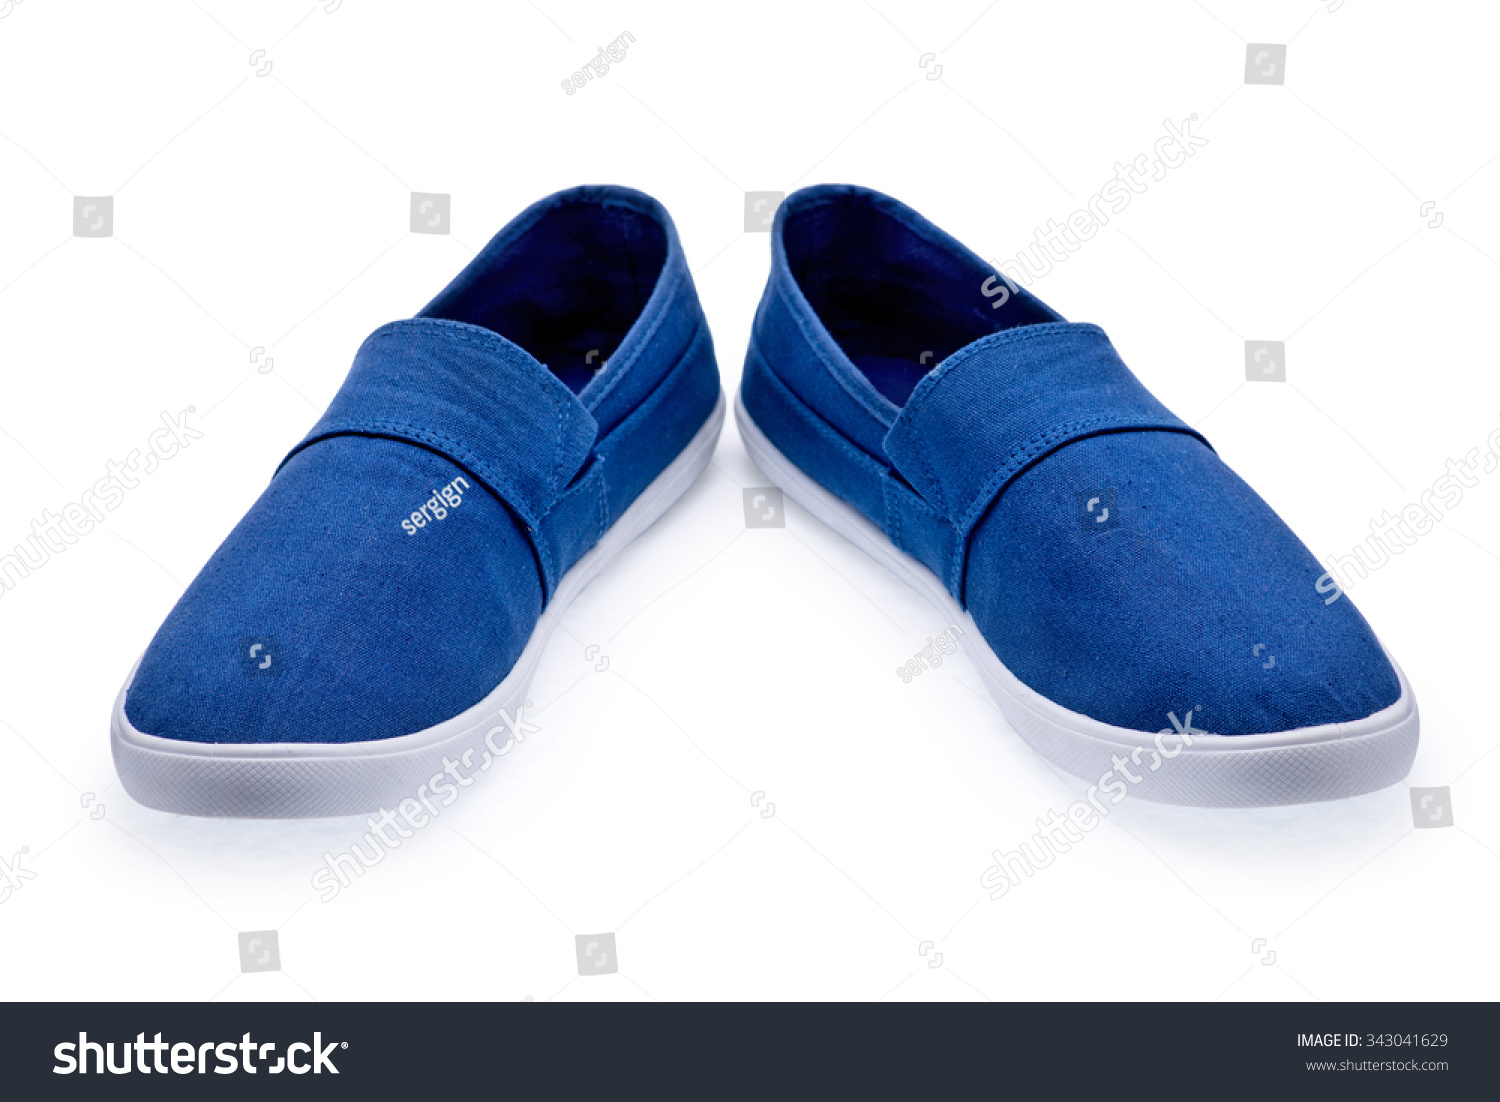 tennis shoes without shoe strings